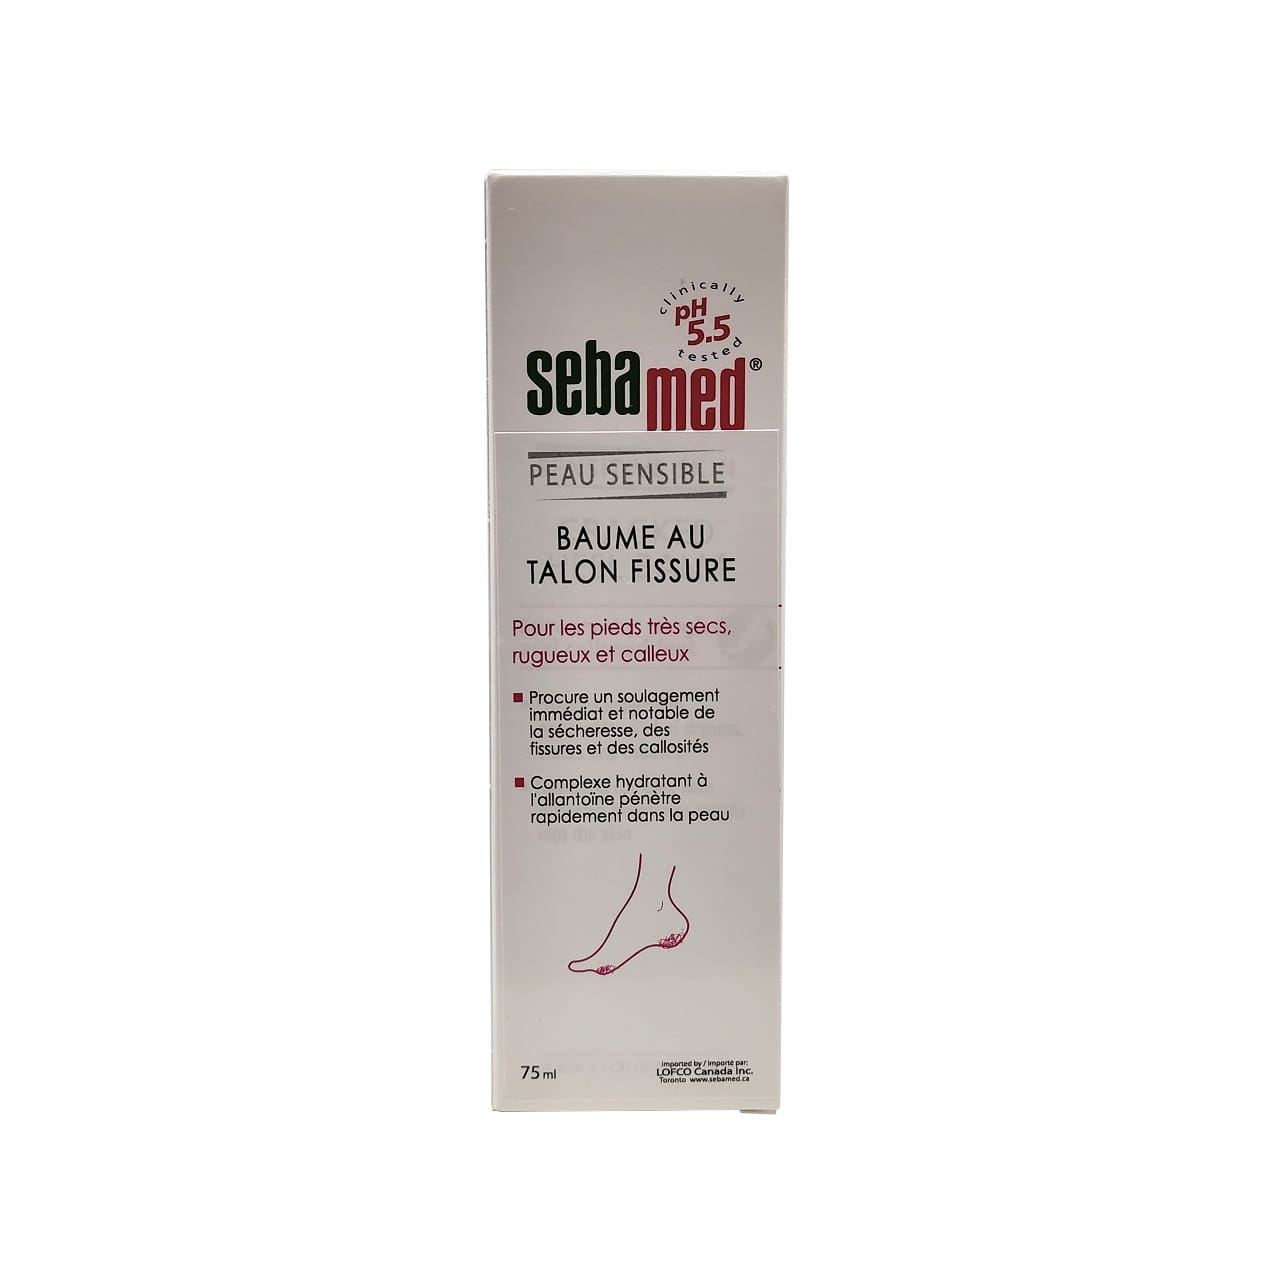 Product label for Sebamed Cracked Heel Balm (75 mL) in French